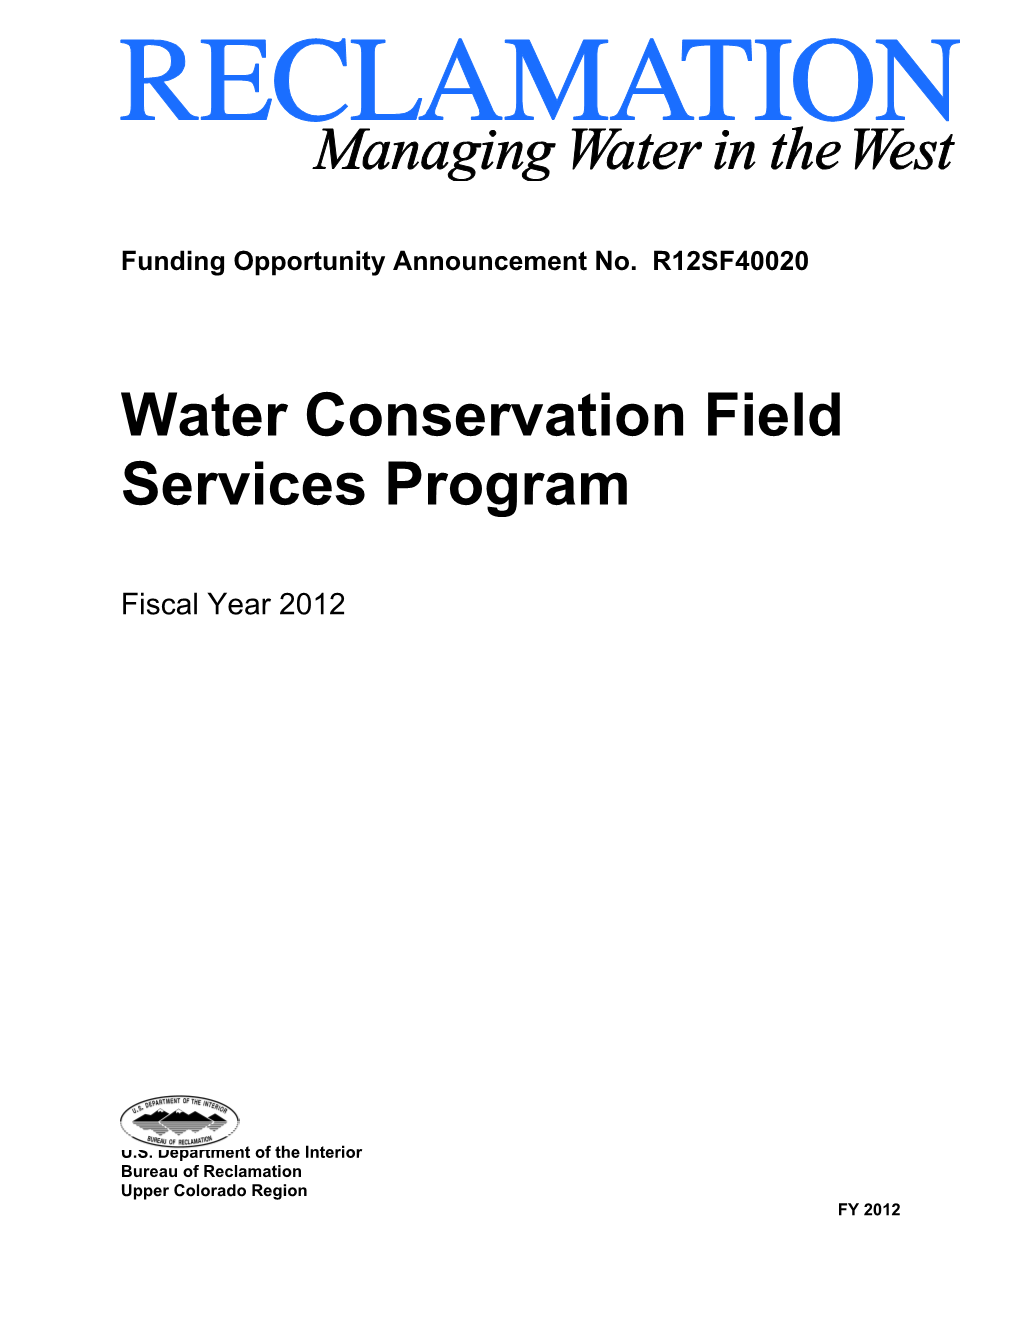 Water Conservation Field Services Program